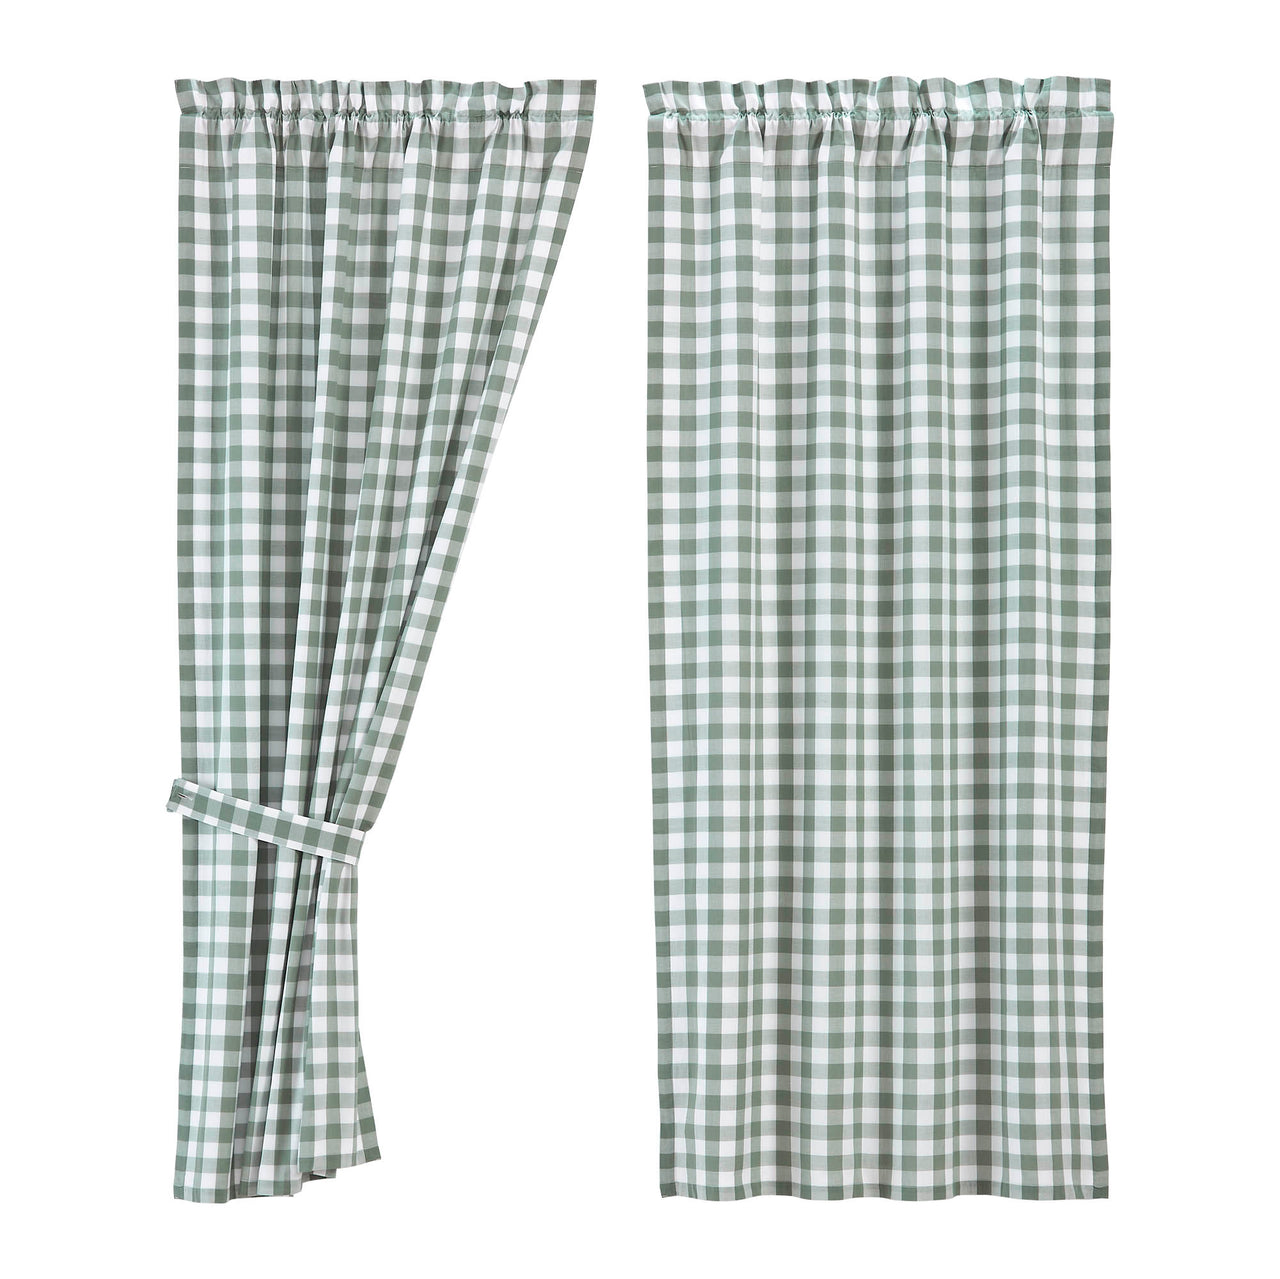 Annie Buffalo Green Check Short Panel Curtain Set of 2 63"x36" VHC Brands